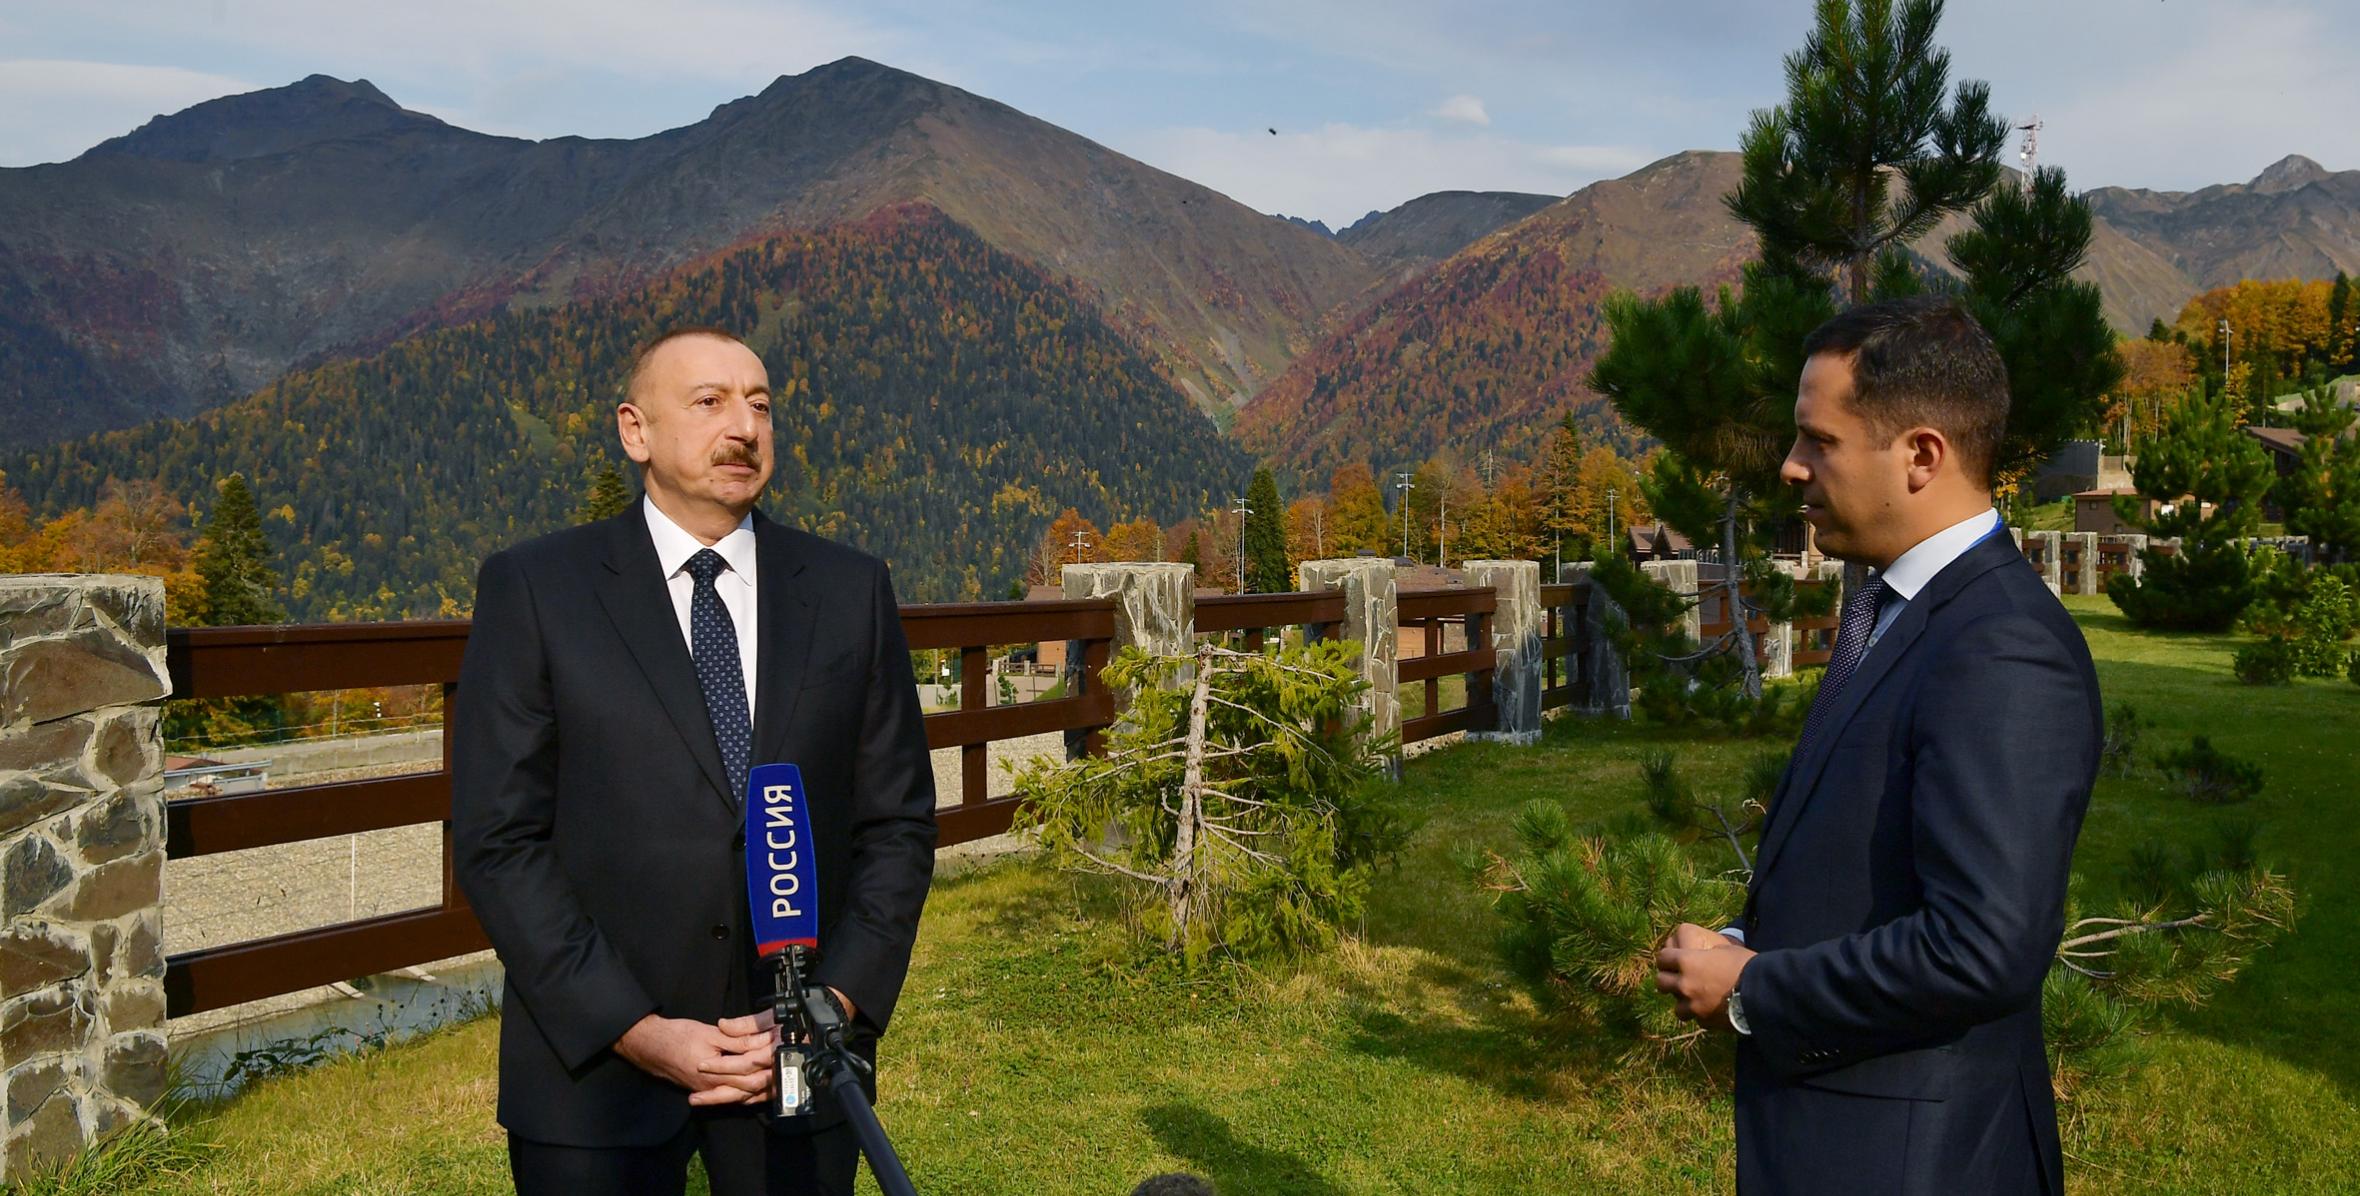 Ilham Aliyev responded to questions from Channel One and Rossiya television channels in Sochi